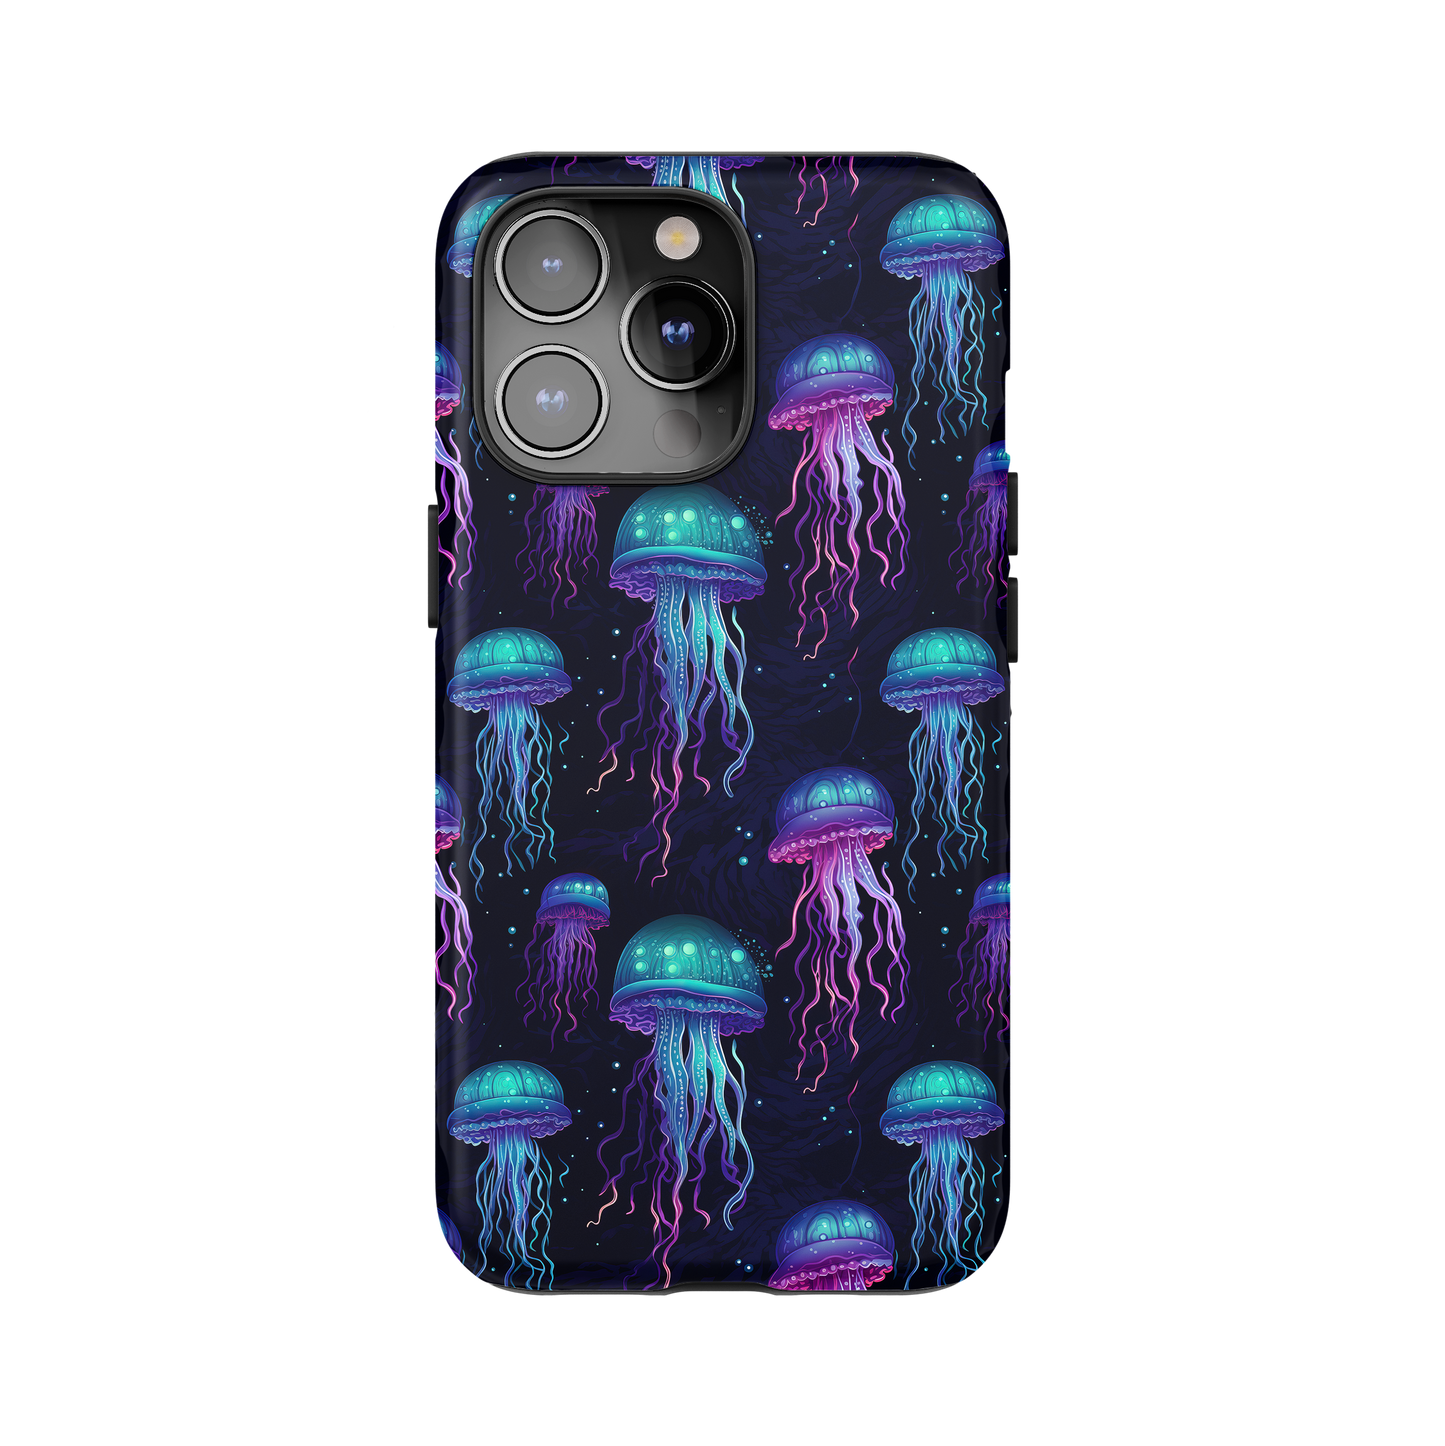 Galaxy Jellyfish Phone Case for iPhone and Samsung